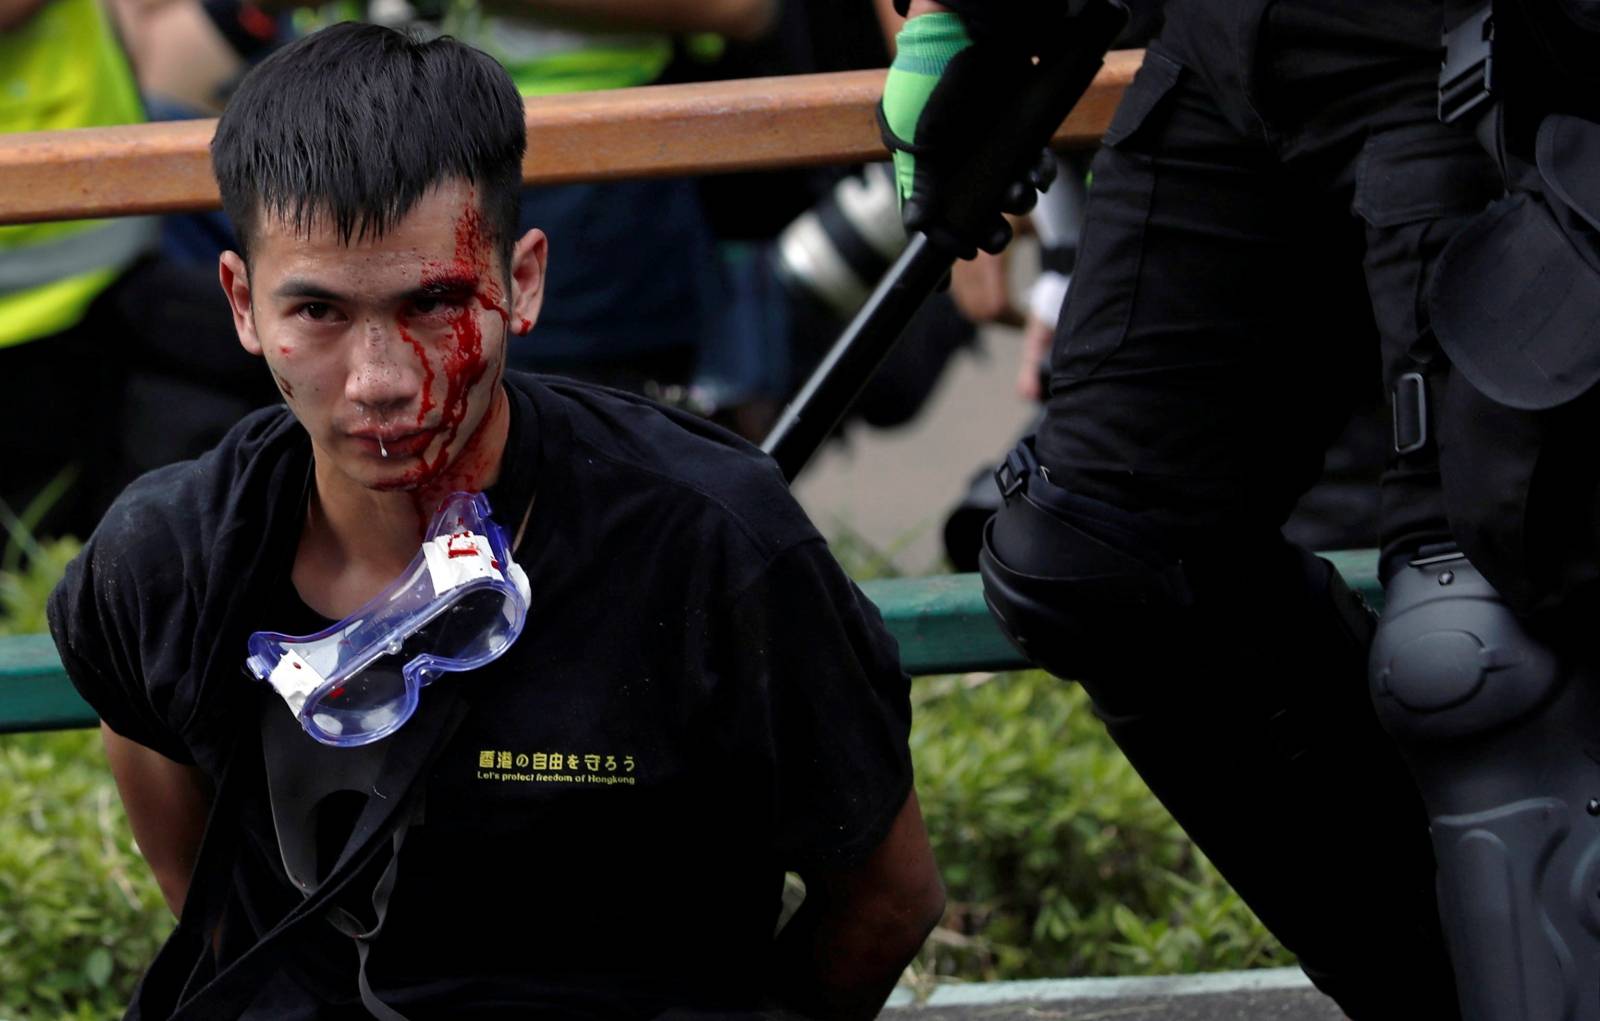 Protesters clash with riot police in the campus of Hong Kong Polytechnic University in Hong Kong